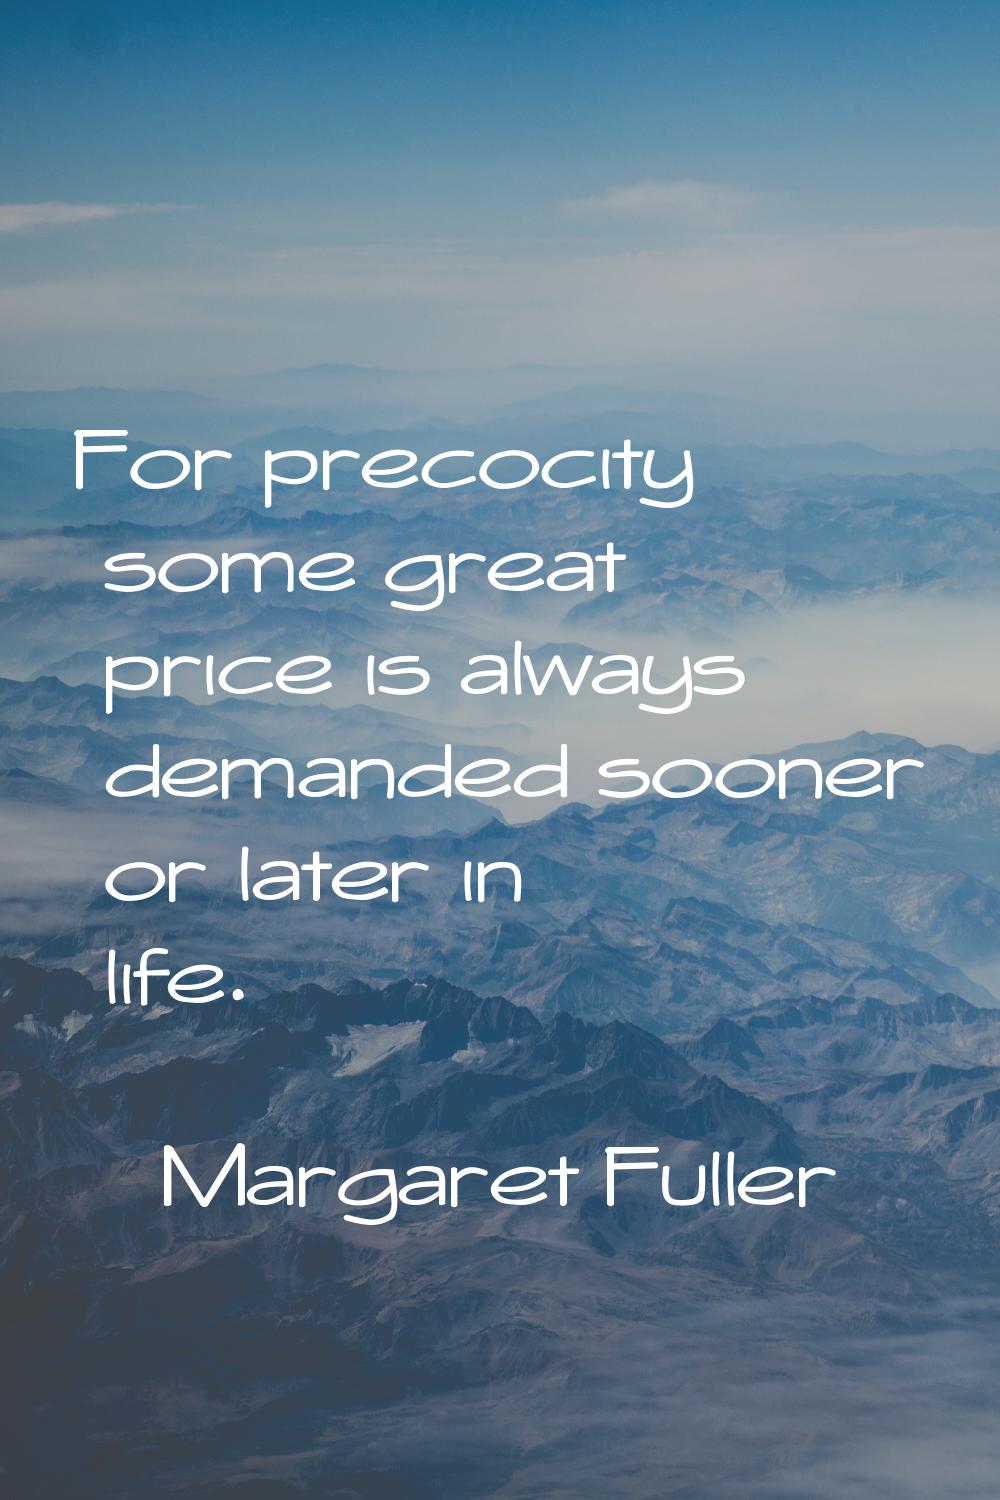 For precocity some great price is always demanded sooner or later in life.